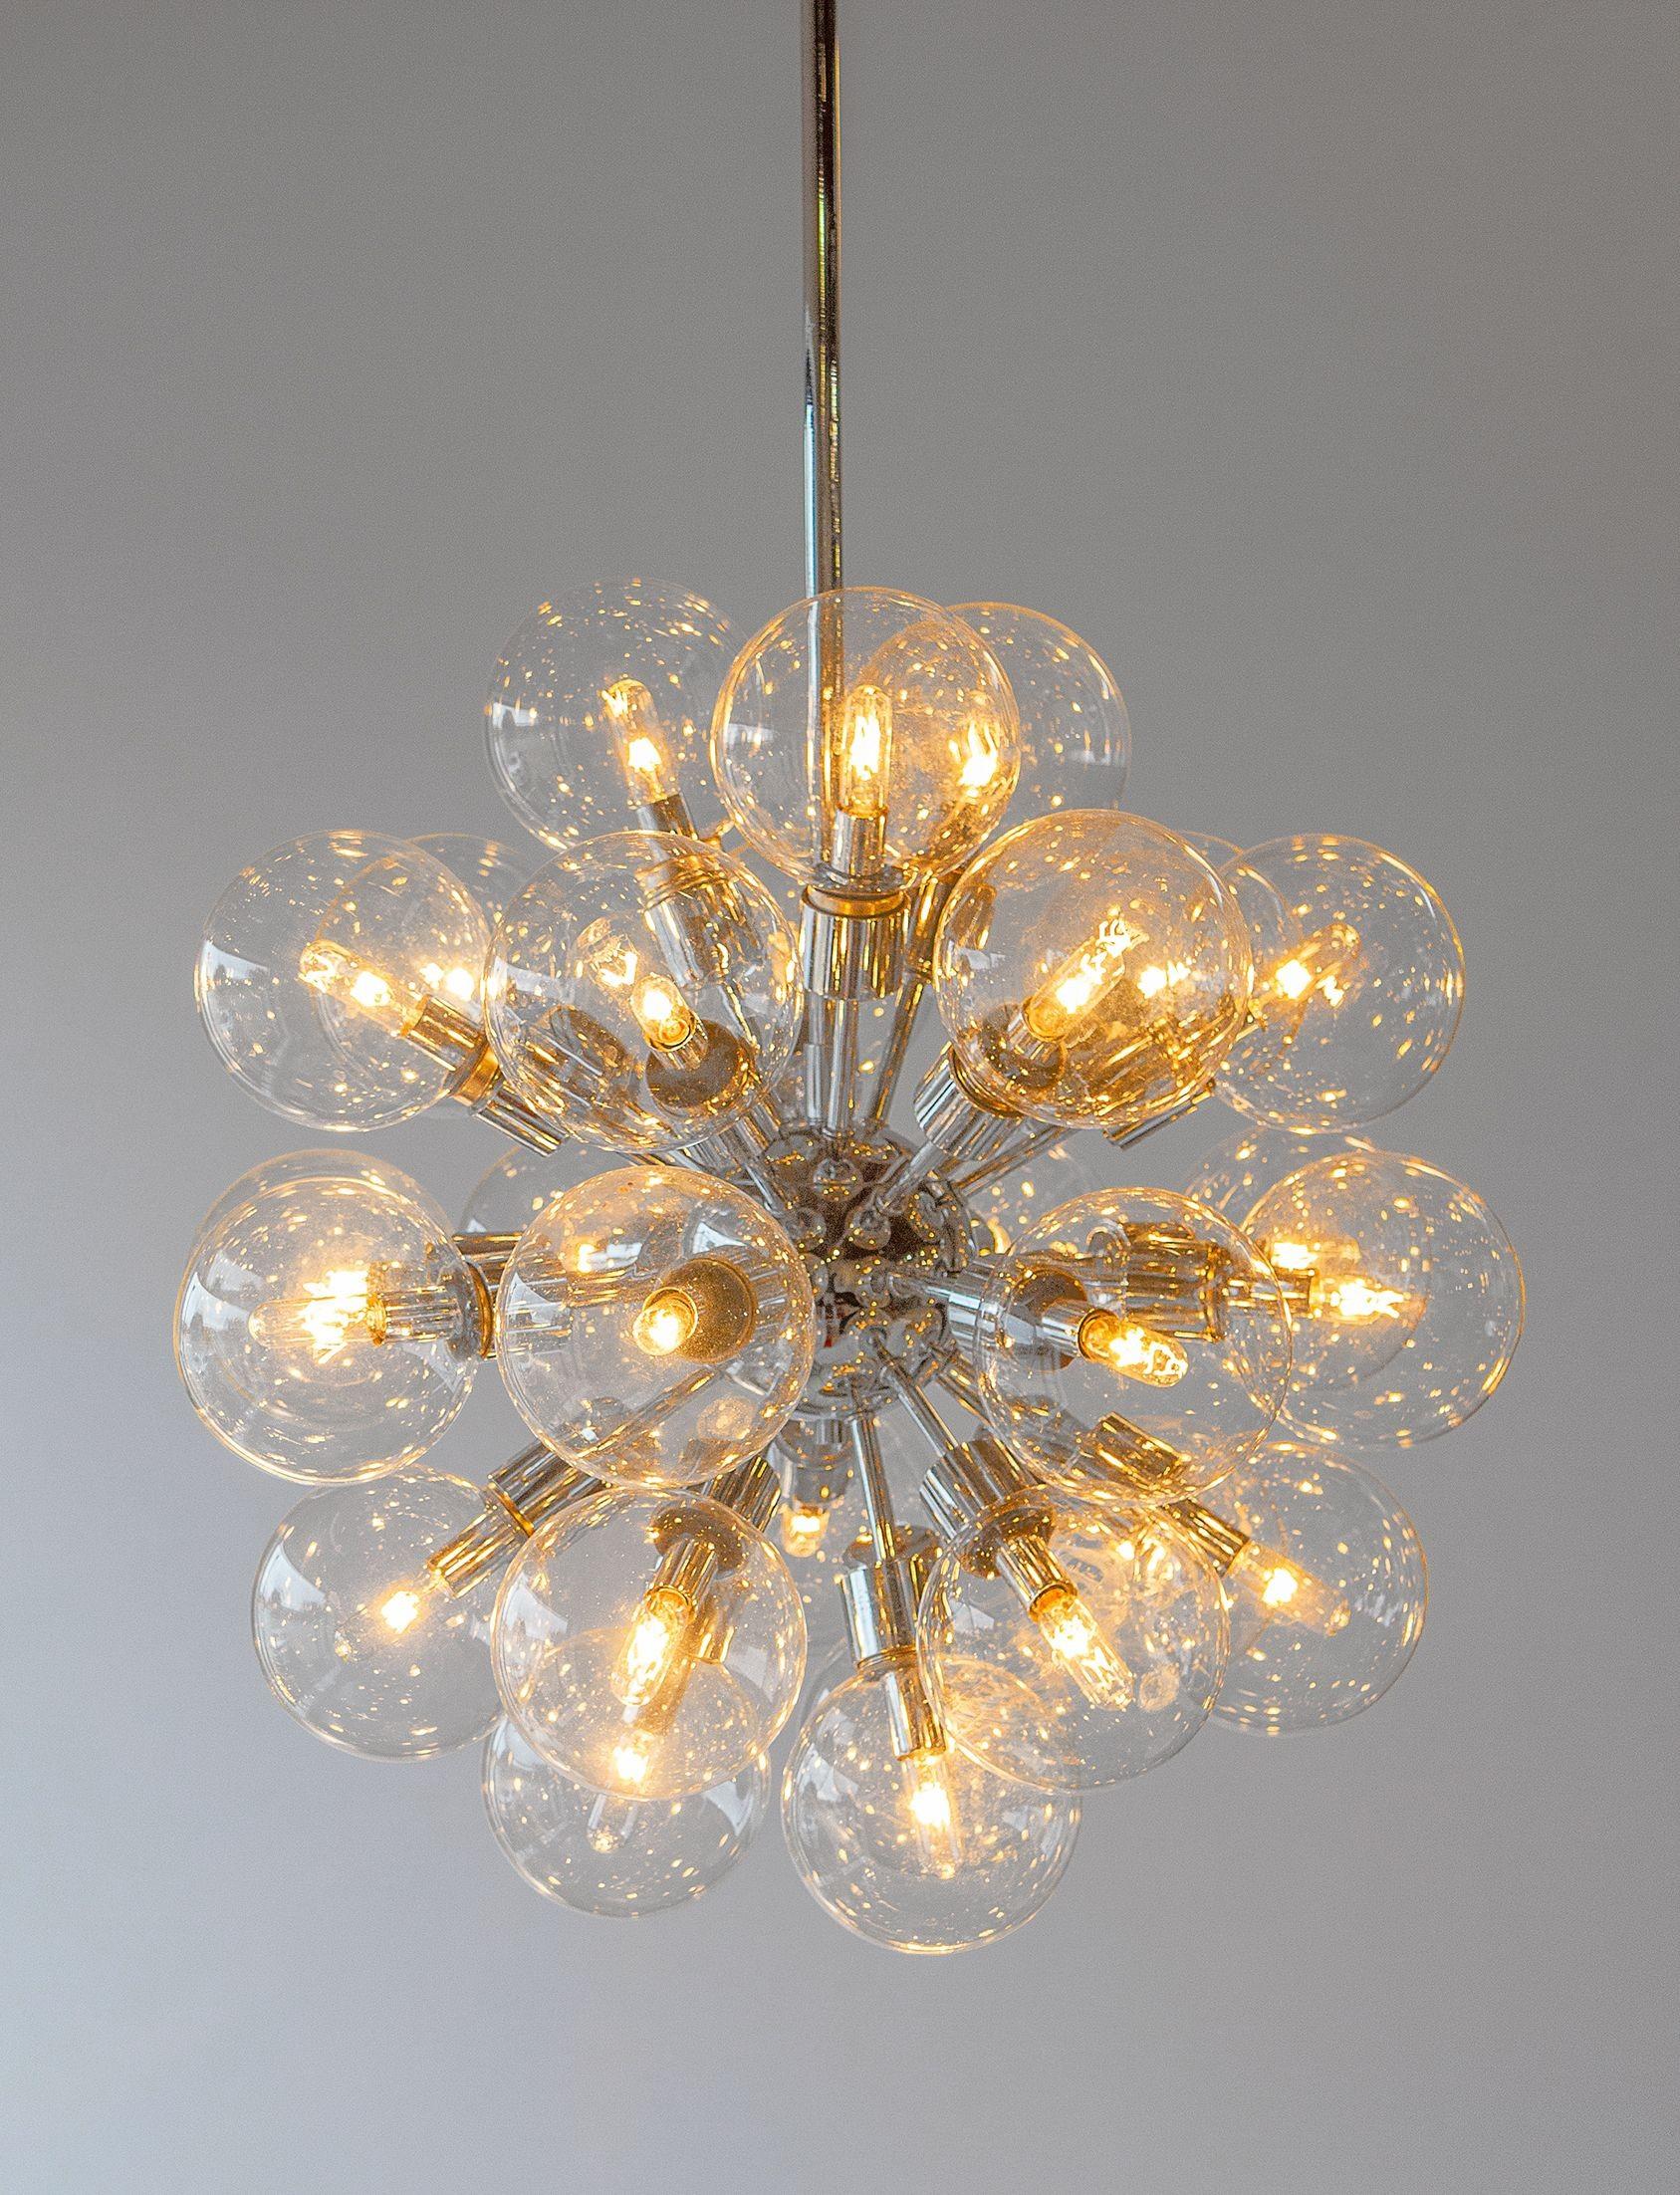 Extraordinary chrome sputnik chandelier designed by Motoko Ishii and produced by Staff Leuchten of Germany and distributed by Lightolier to the American Market.

All original decorative blown glass bubbles are intact and free of damage.

Motoko